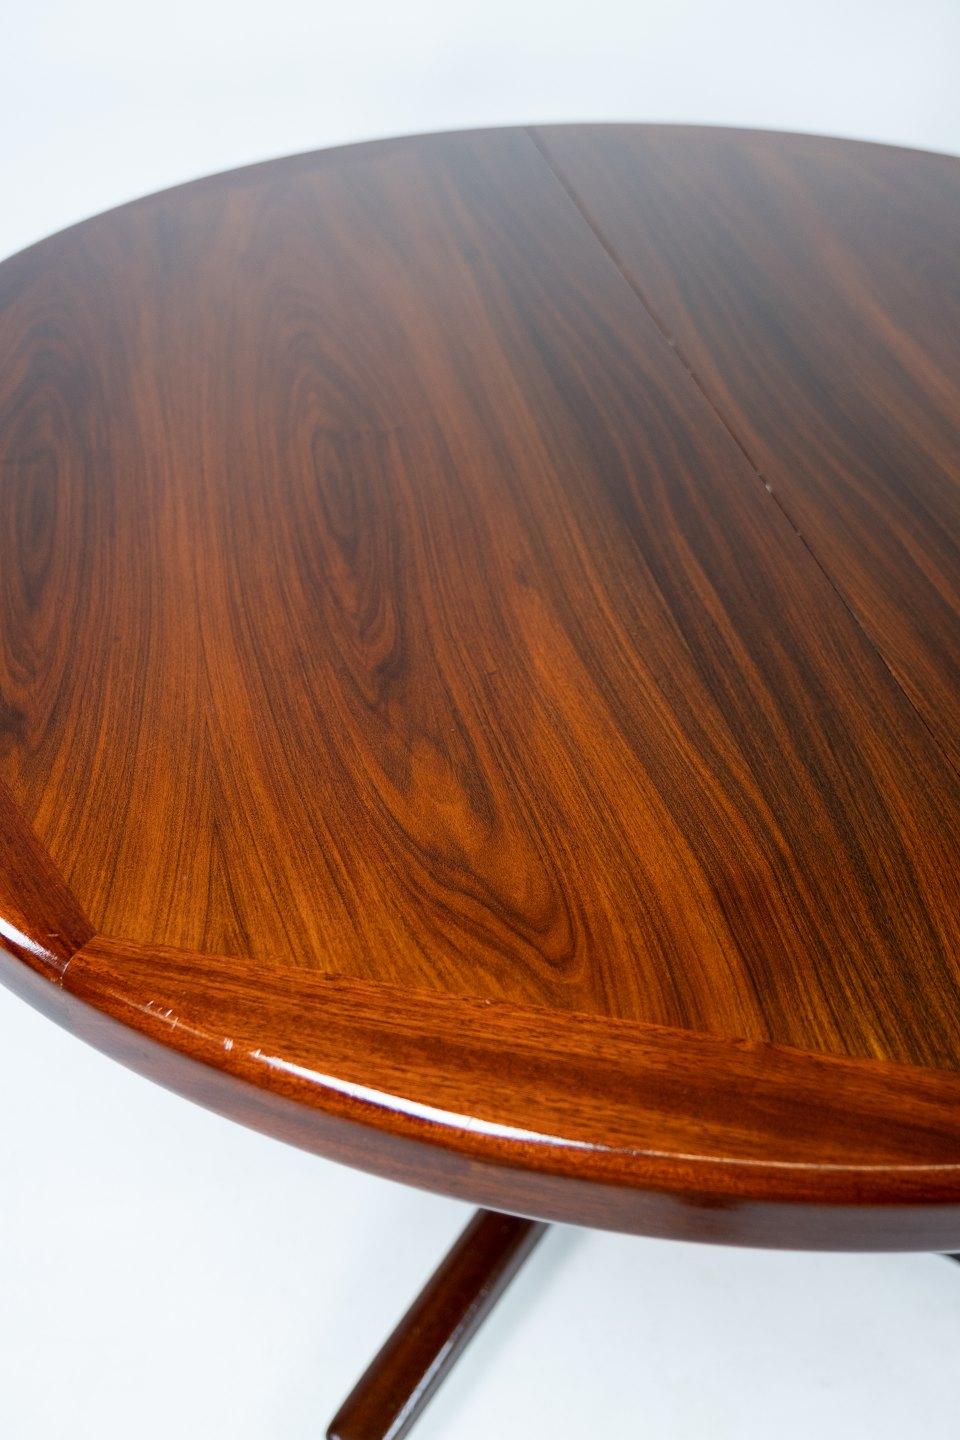 Scandinavian Modern Dining Table in Rosewood of Danish Design Manufactured by Vejle Furniture, 1960s